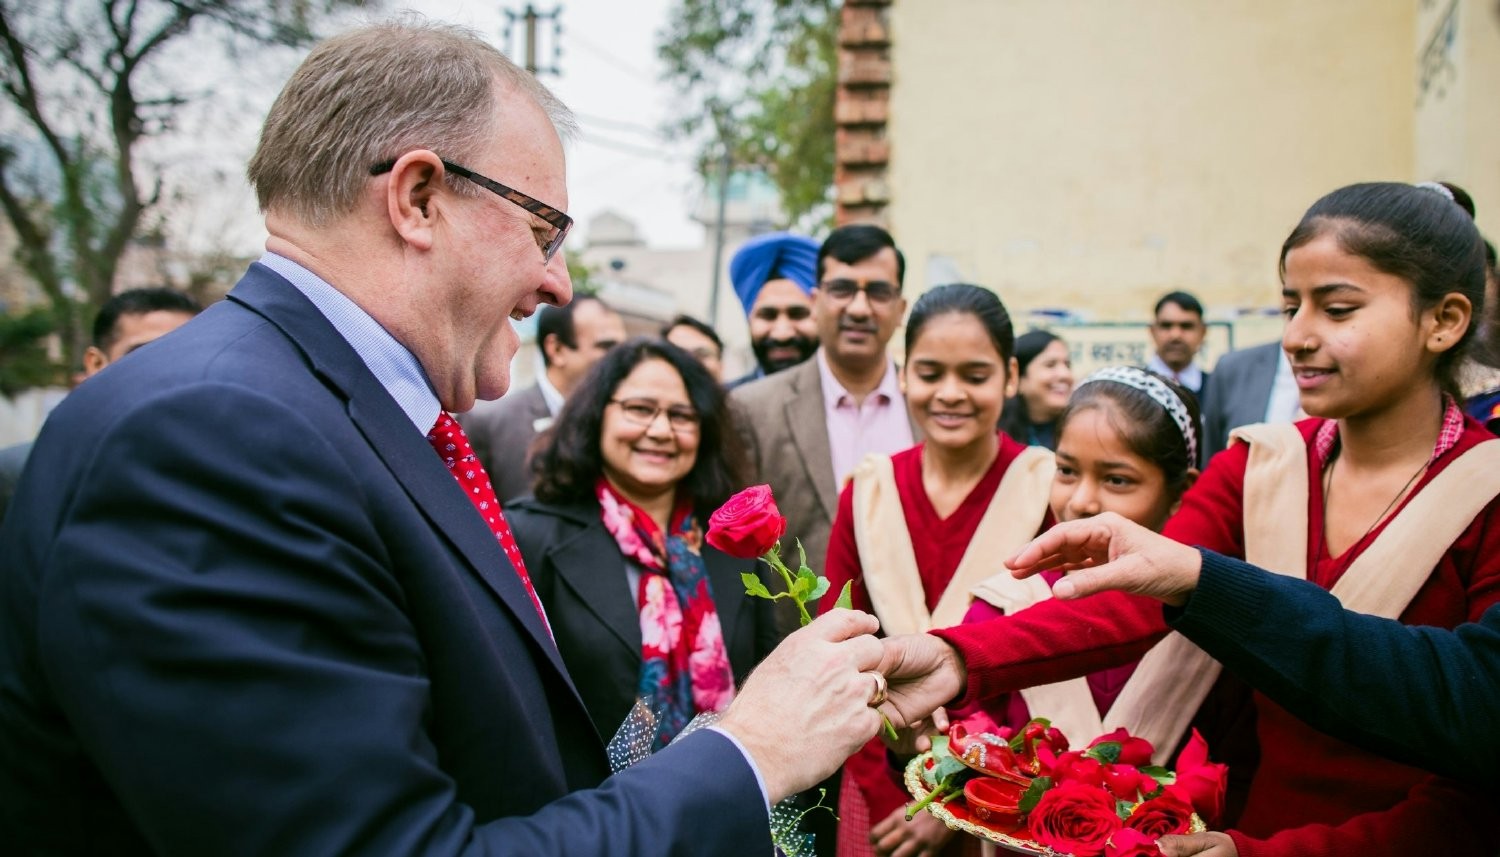 Agilent President and CEO, Mike McMullen, greets local students during a visit to our Agilent India location.